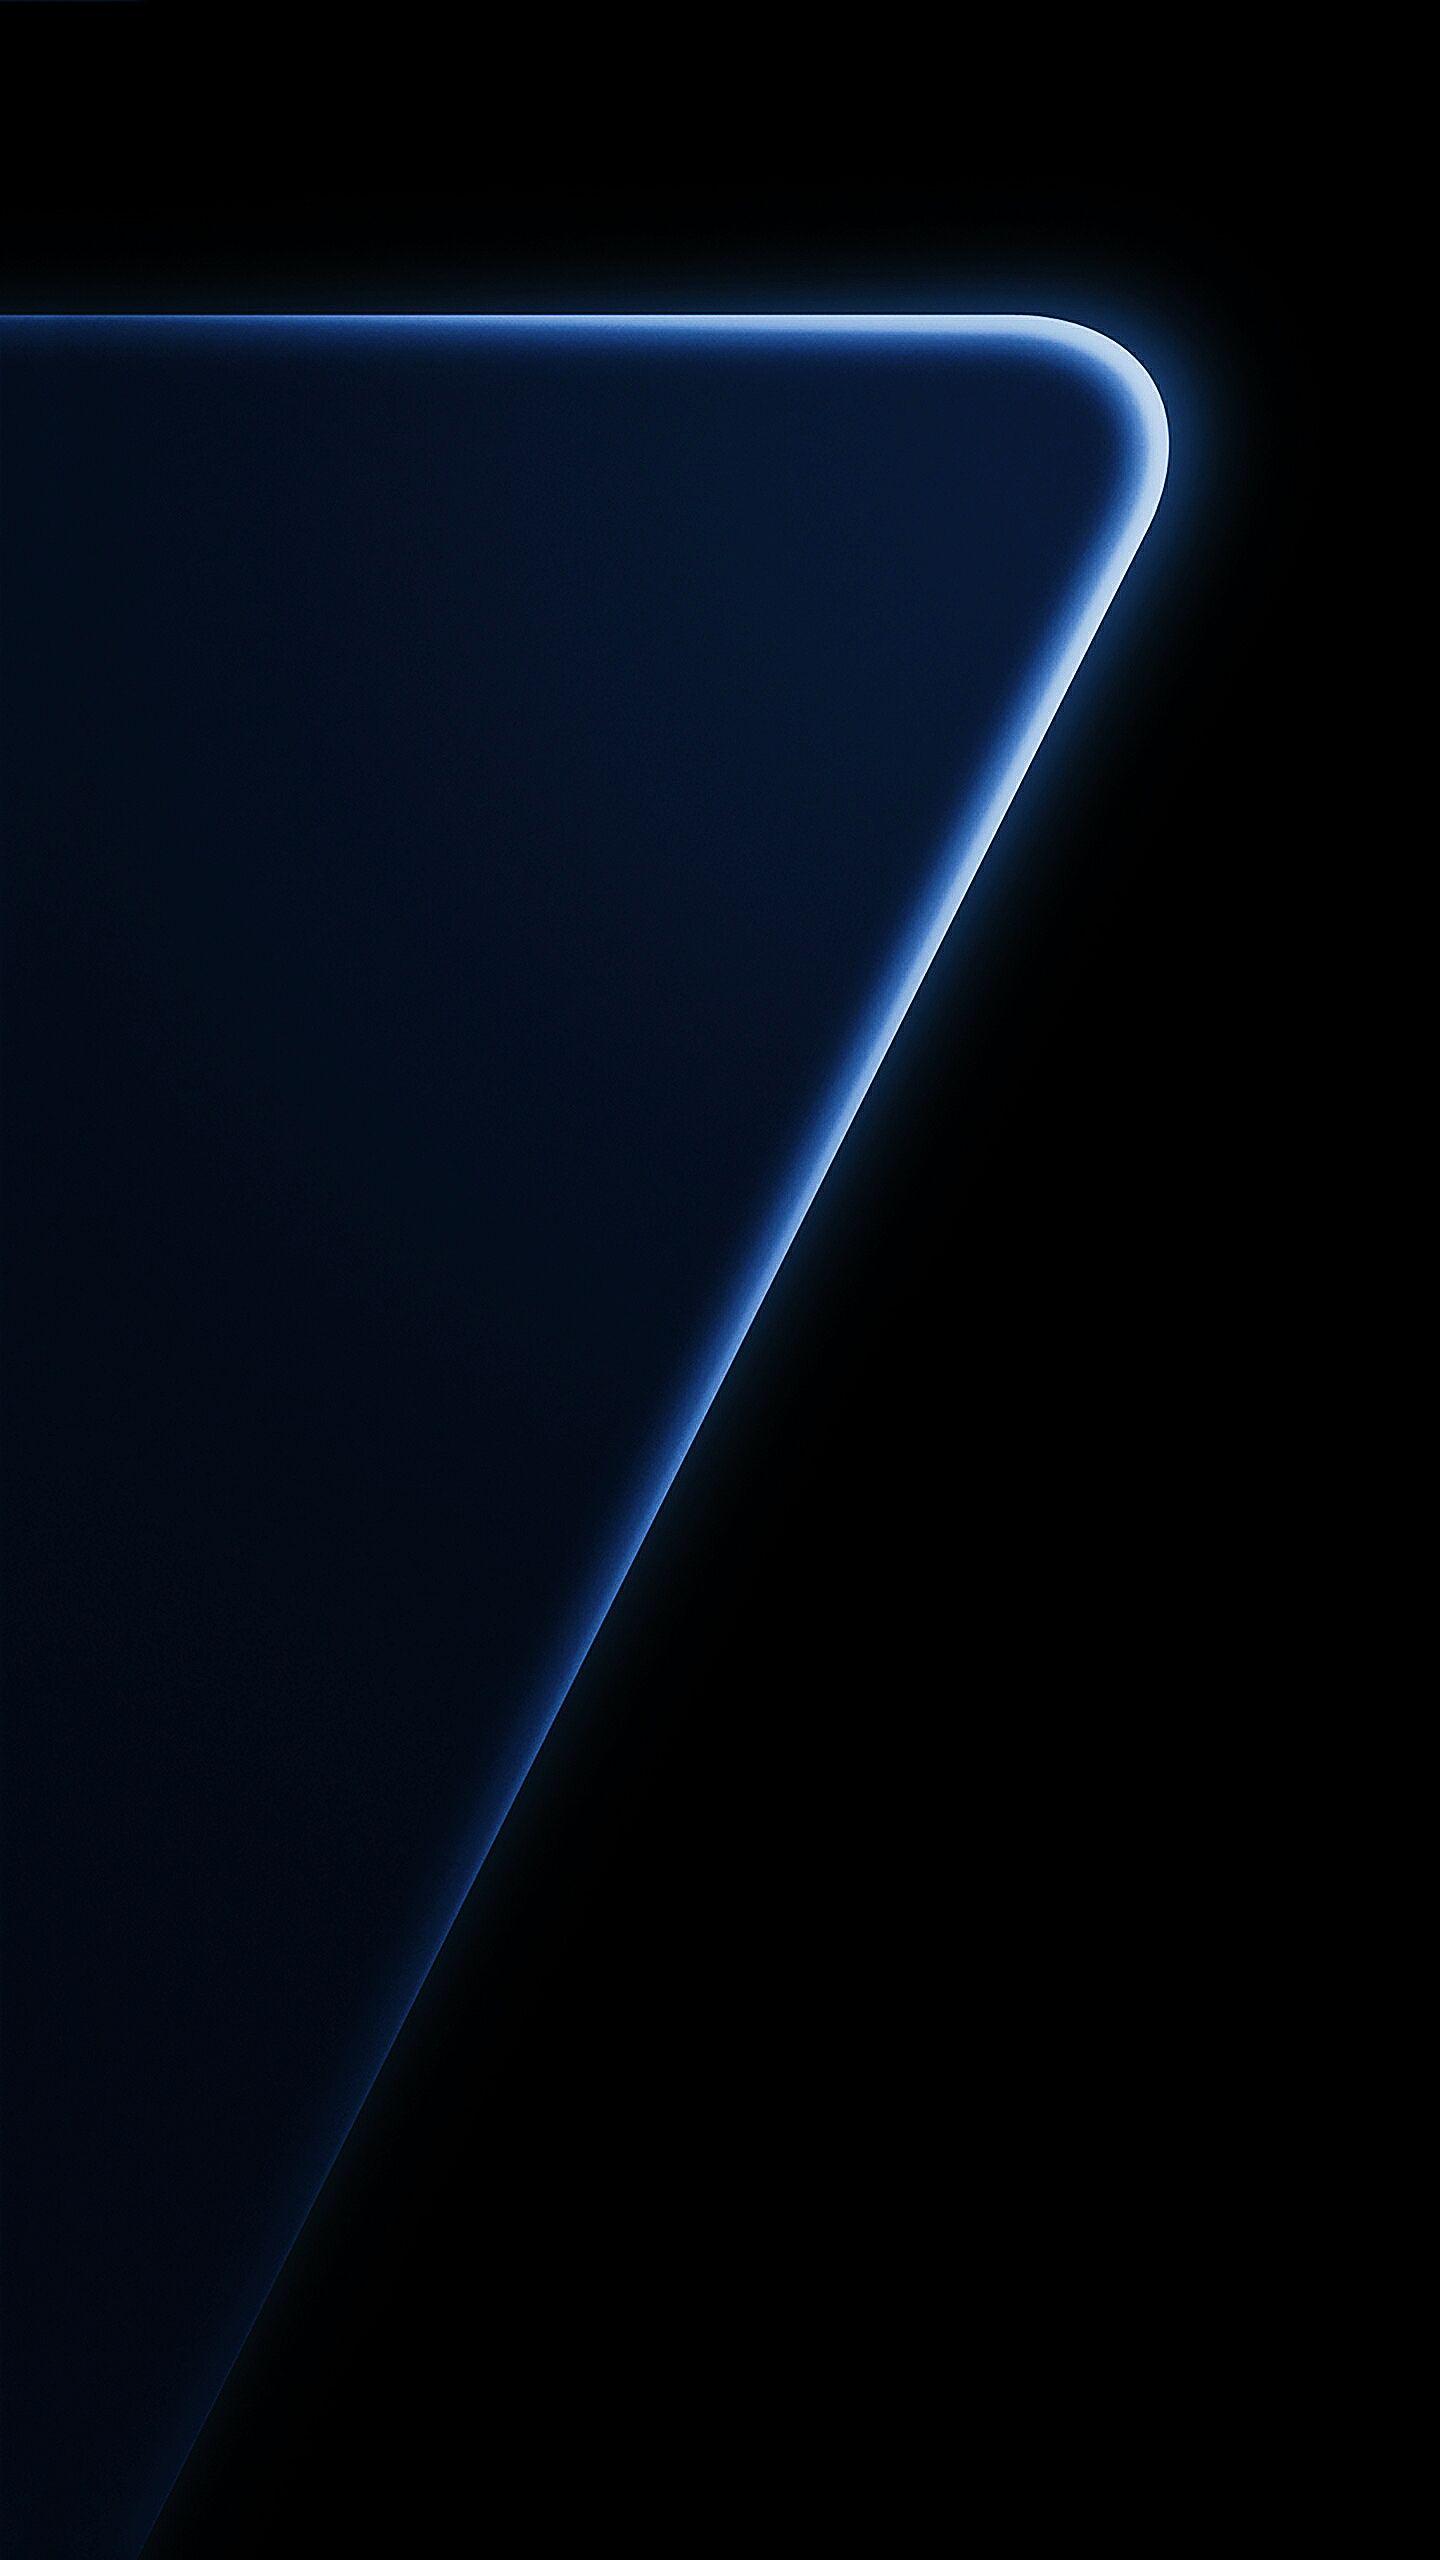 Edited the wallpaper from the pearl black s7 edge to suit more of my